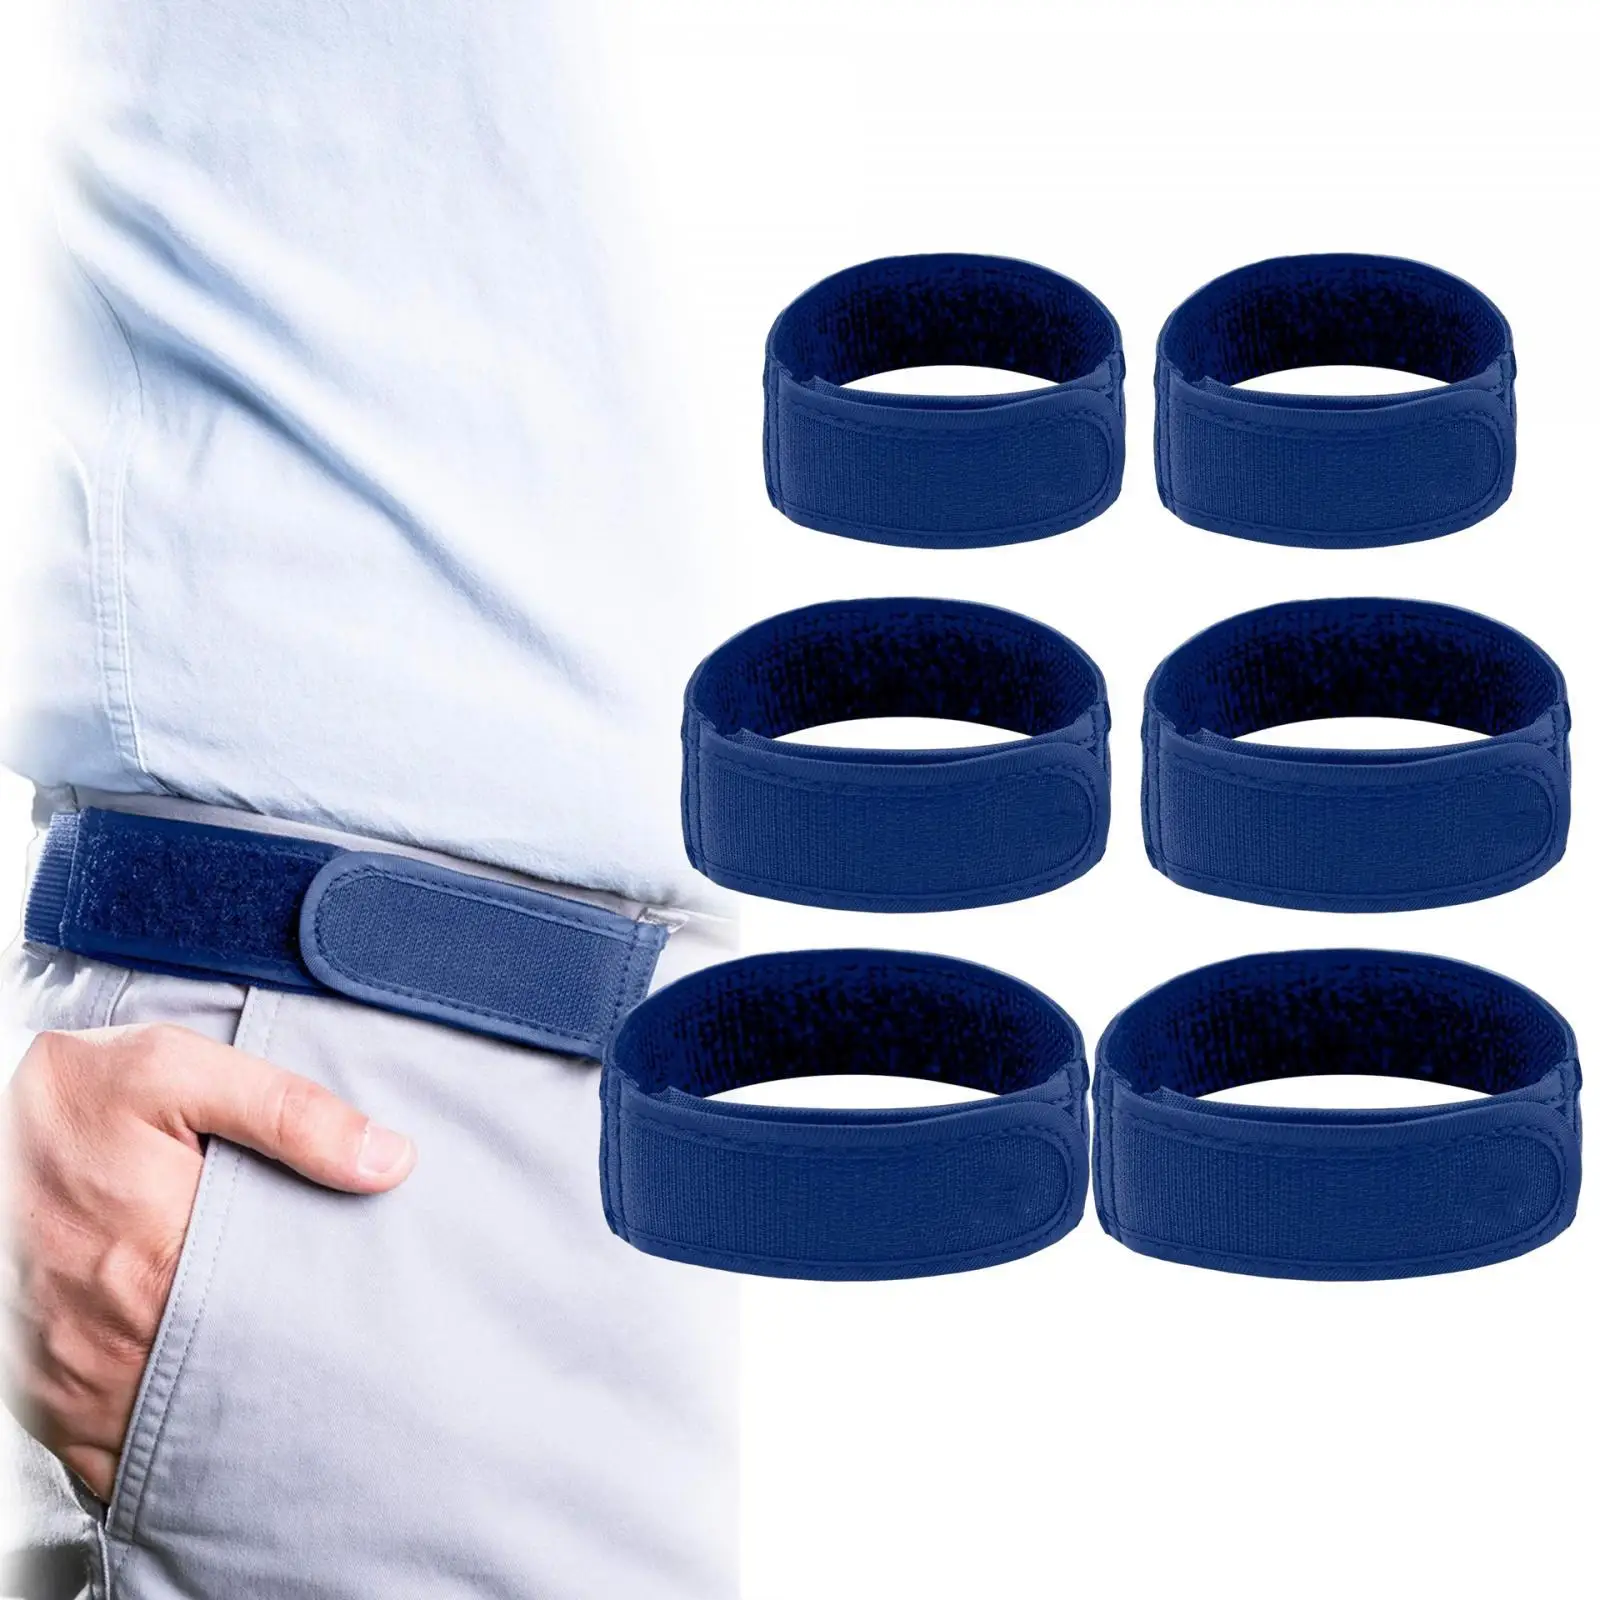 2x Buckle Free Waist Belts No Buckle Elastic Belts for Trousers Shorts Pants